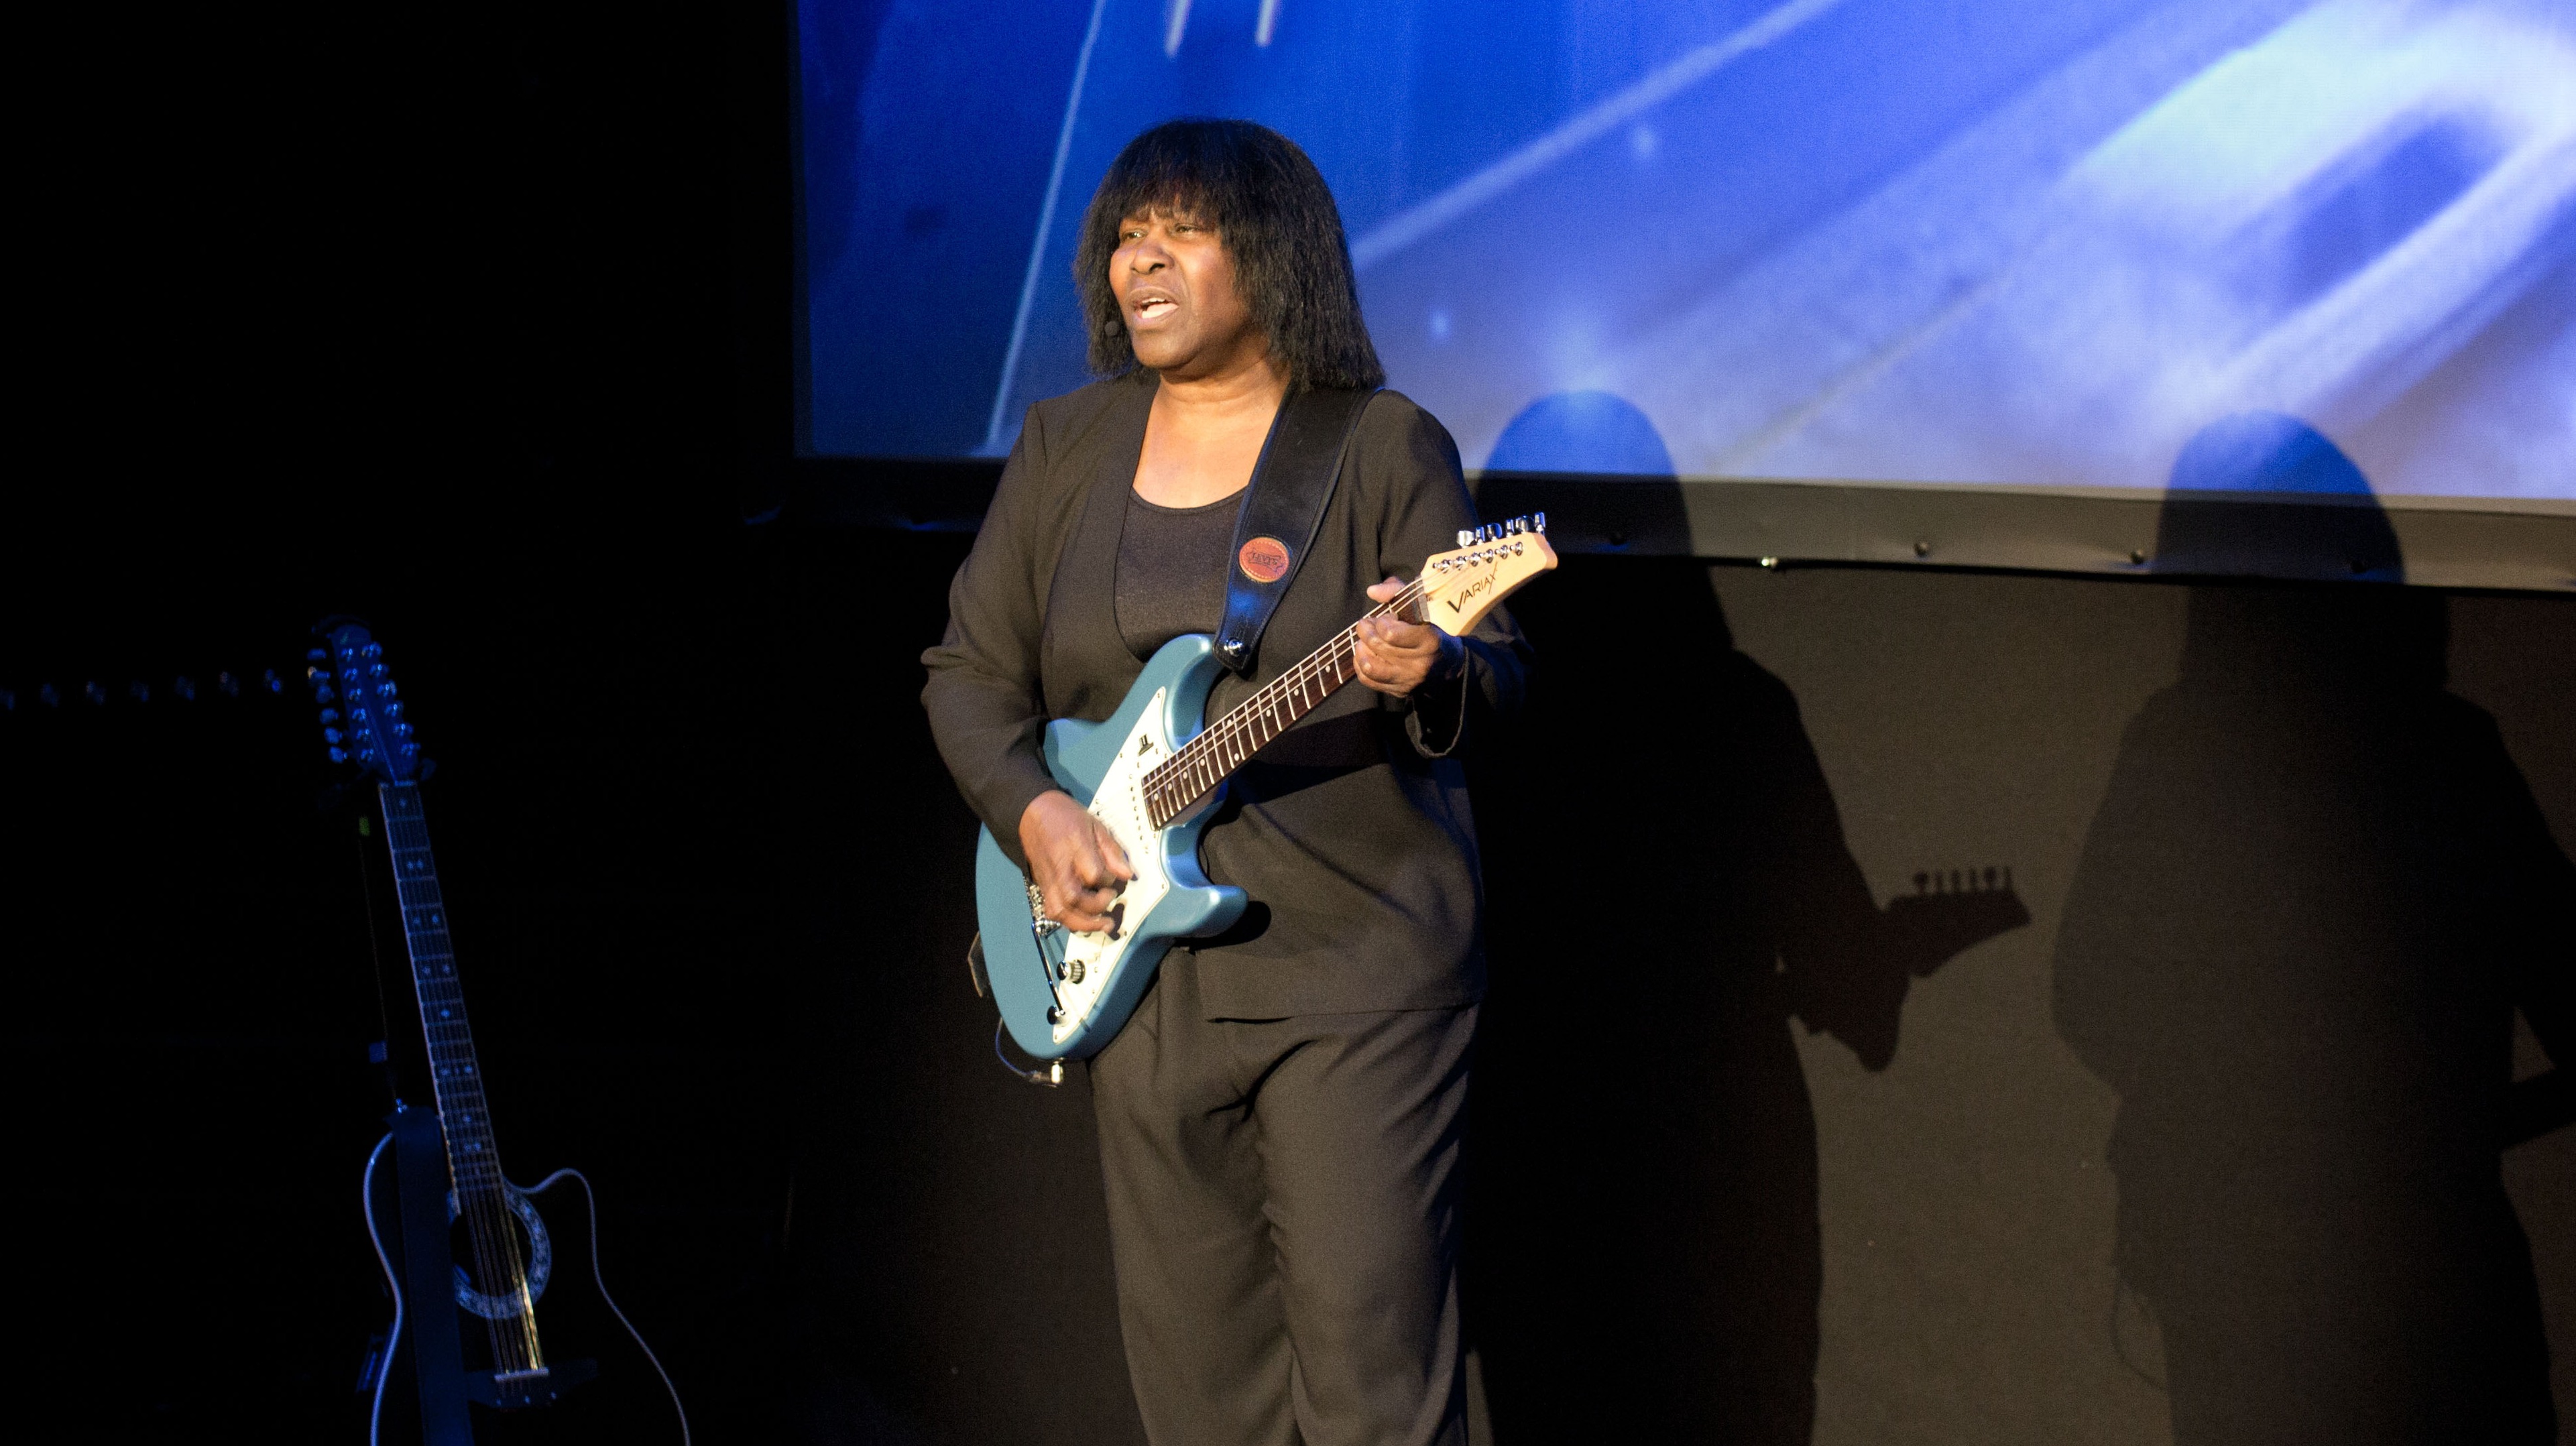 Joan Armatrading returns to London for climax of tour ITV News London